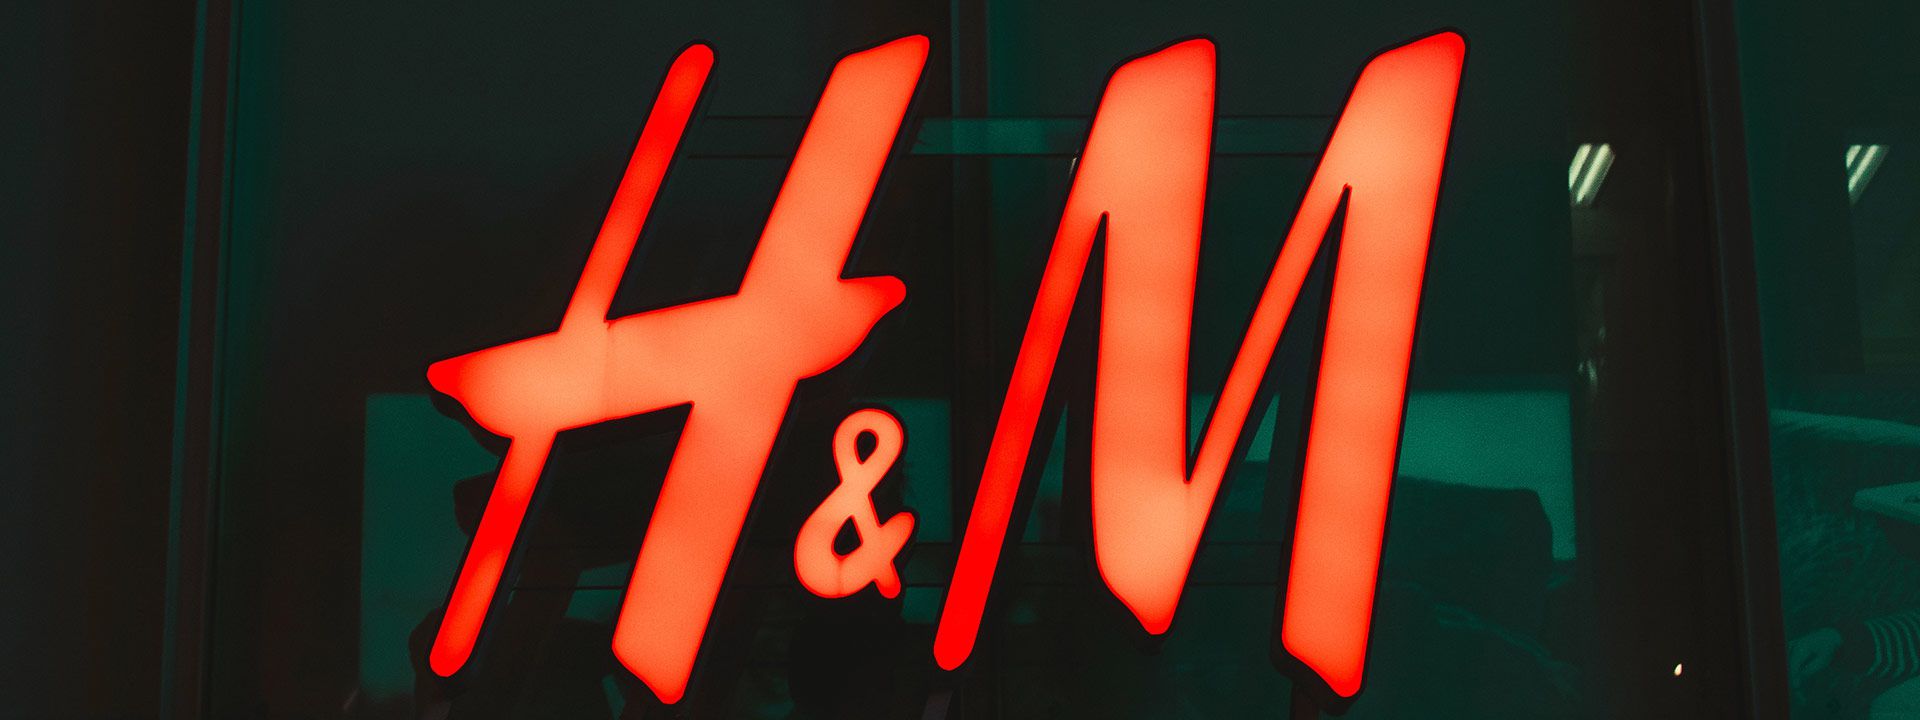 H&M to double investments this year to ramp up tech offerings